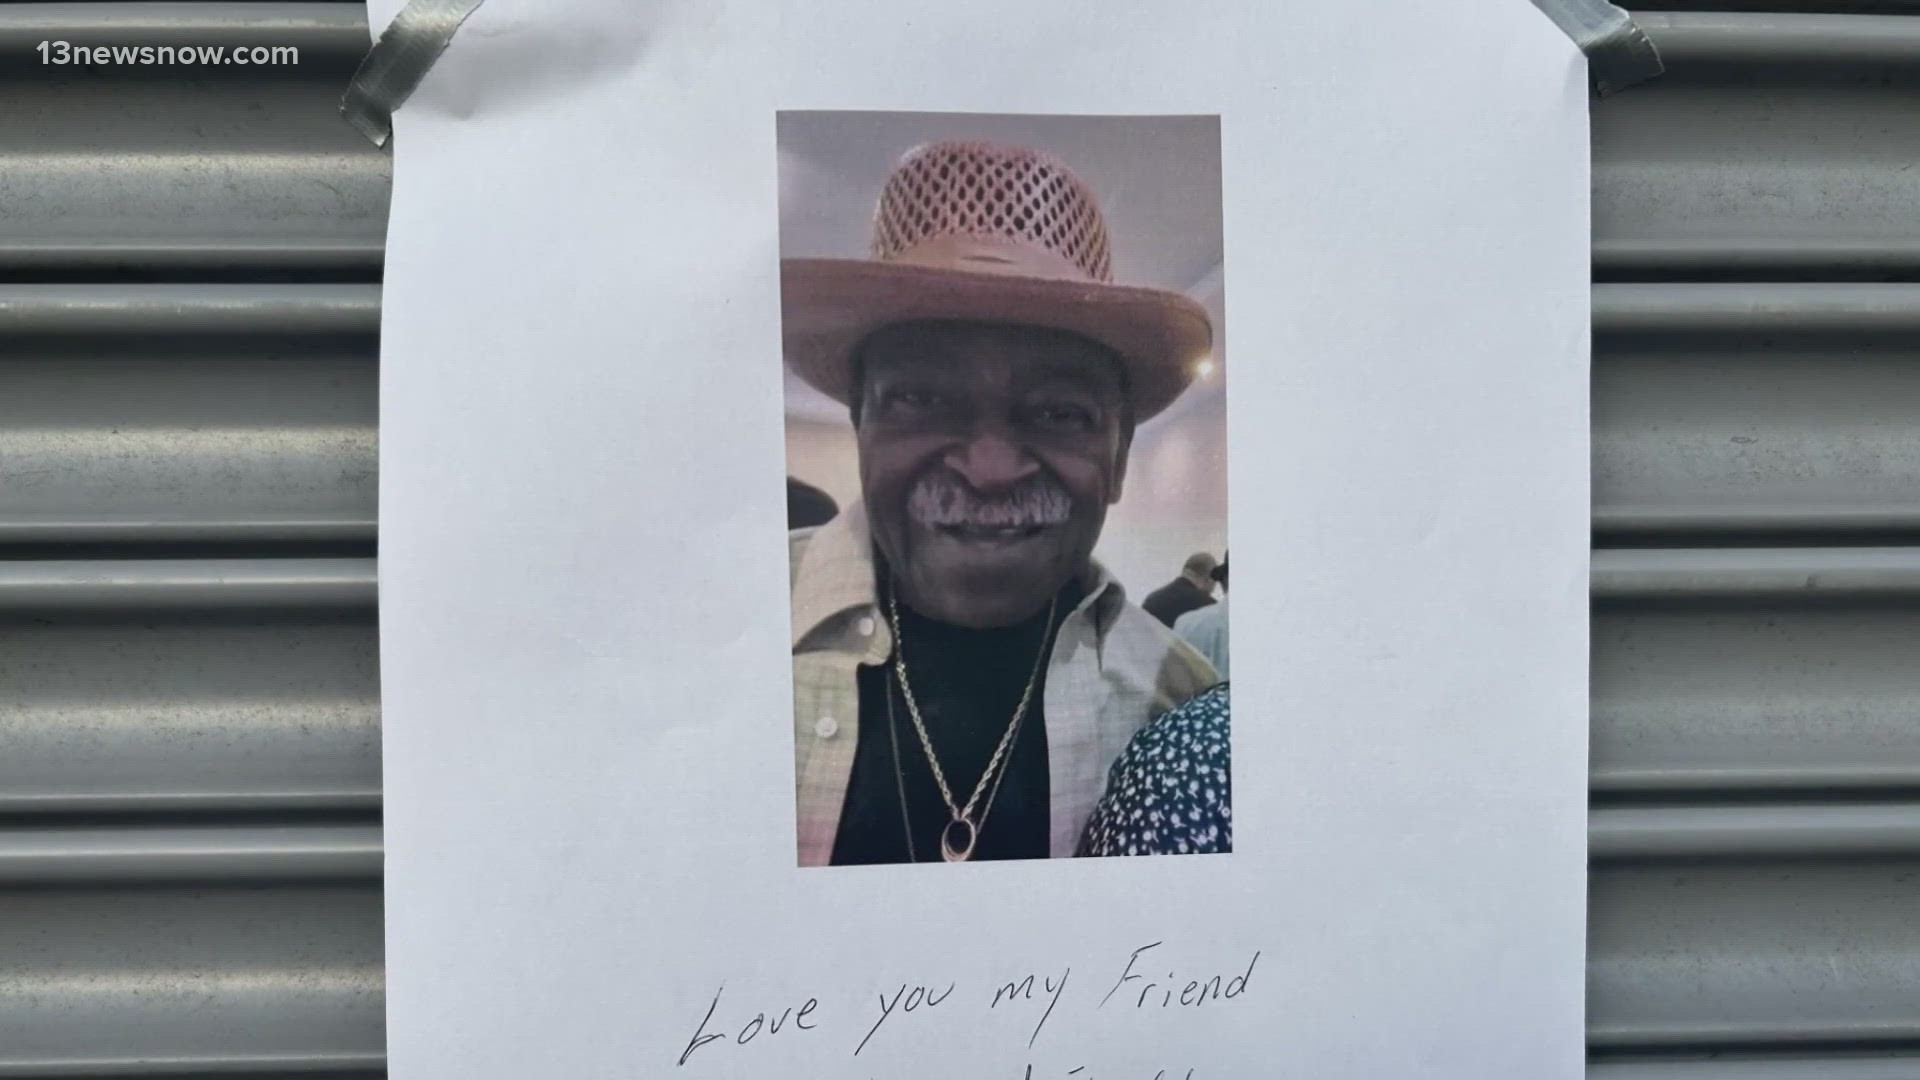 Generations of people knew 84-year-old James Carter as a kind and giving person. He was shot and killed while working at his family's convenience store last night.